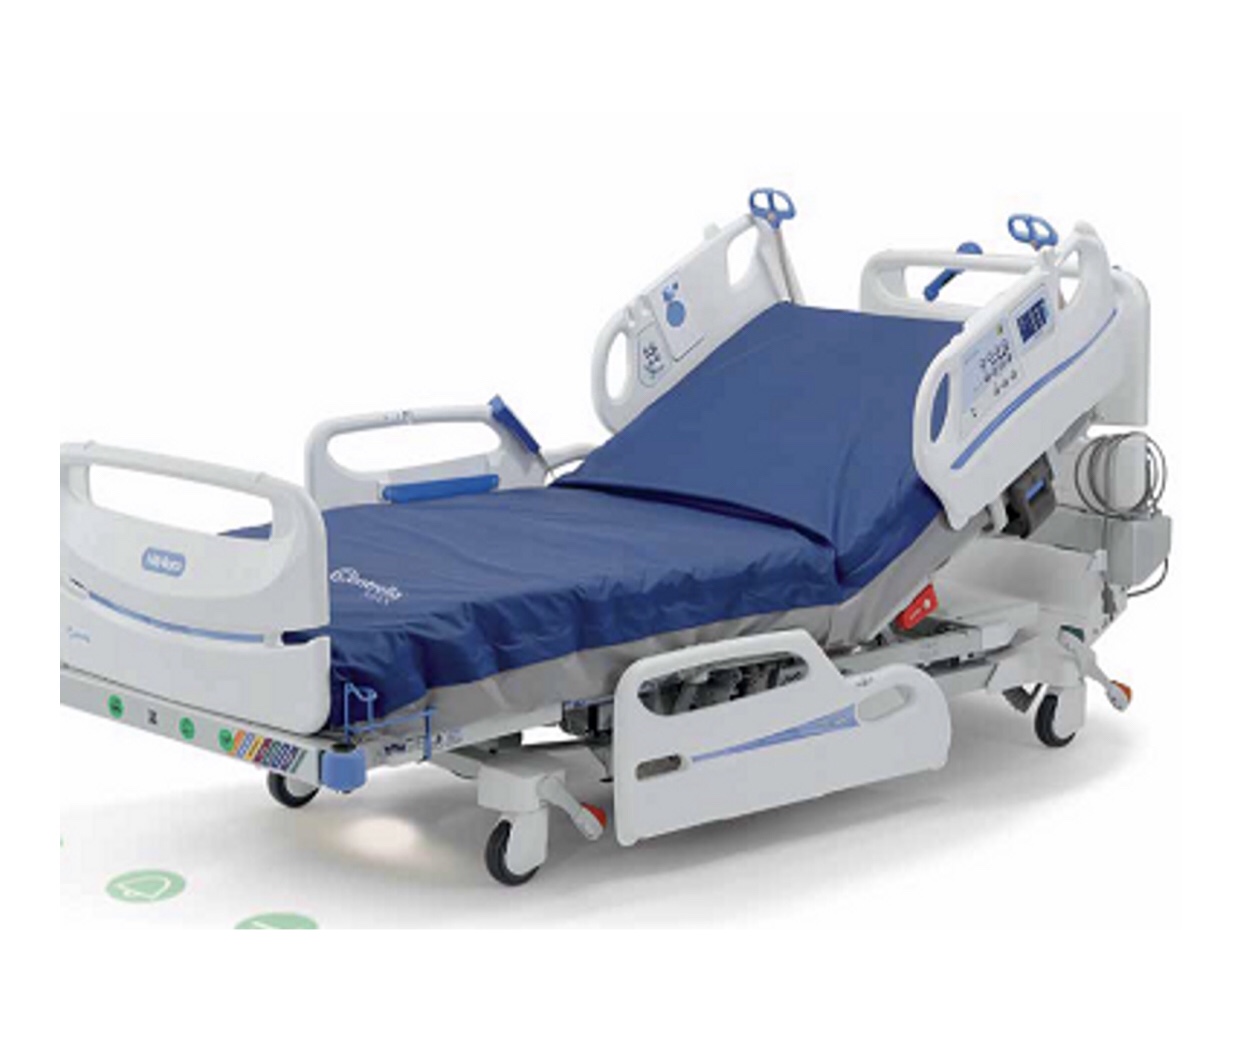 Choosing the Best Hospital Bed for a Home Care Patient: A Step-by-Step Guide